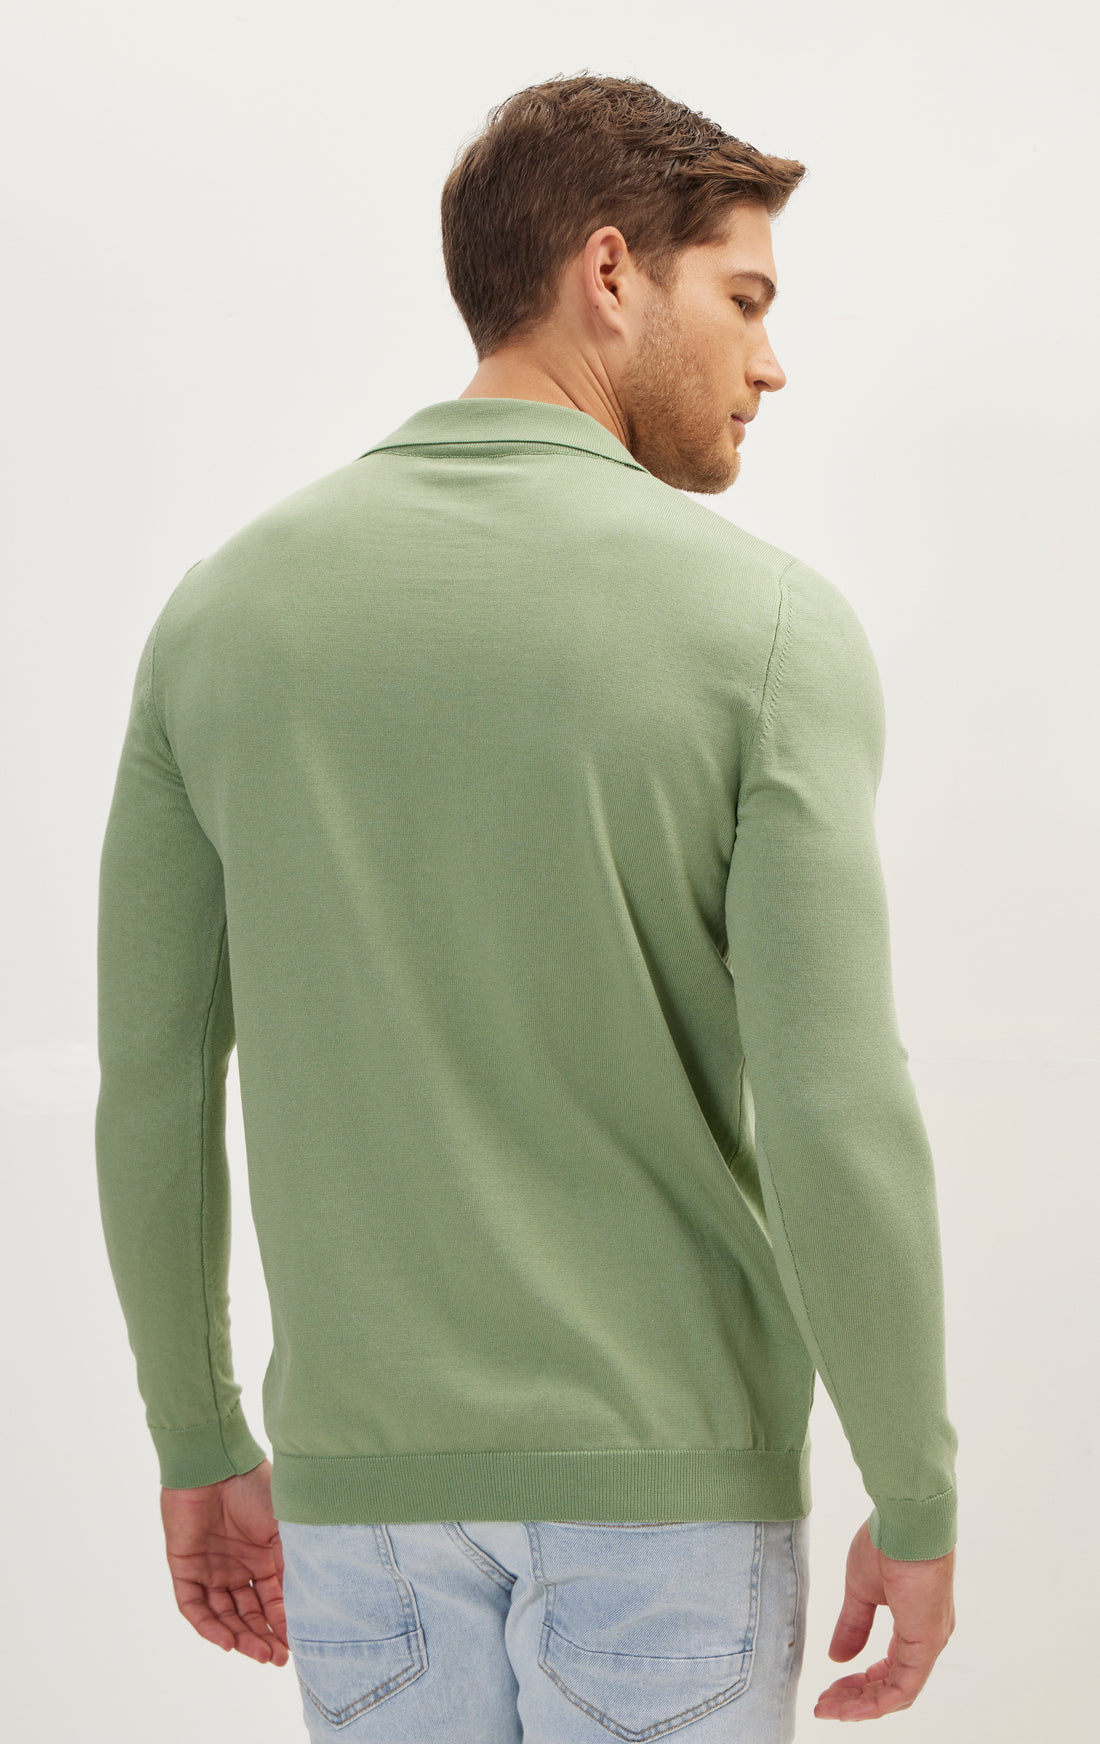 Johnny-Collar Sweater Polo - Teal Green